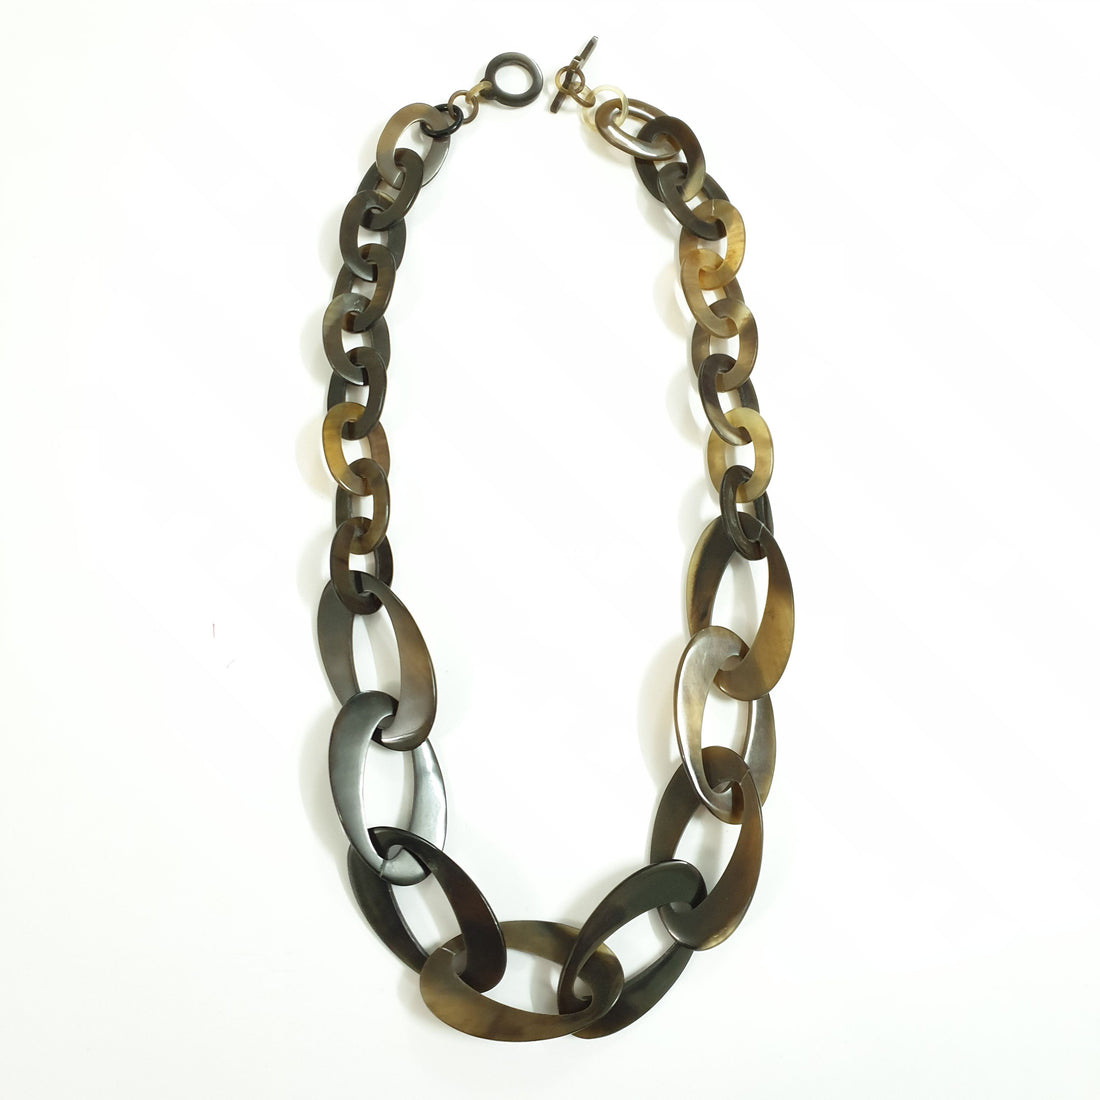 Jasmino unique handmade Vintage chain link necklace jewelry features a dark colour in natural buffalo horn for women's gifts on Christmas